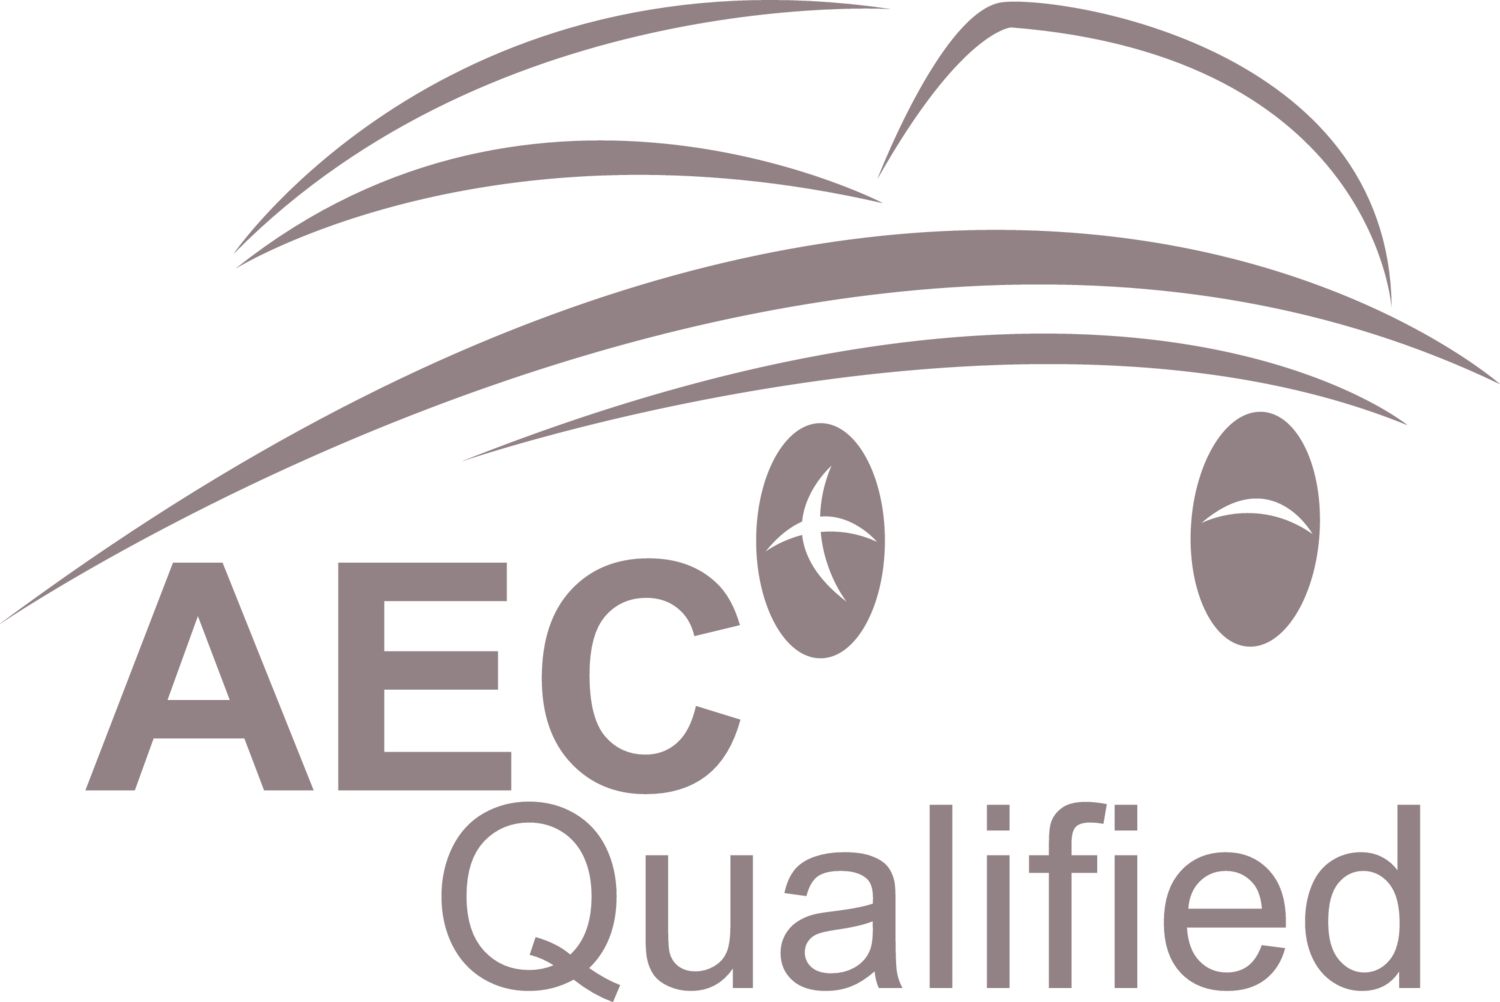 Aec Qualified - Battery Recycling (1500x1002)